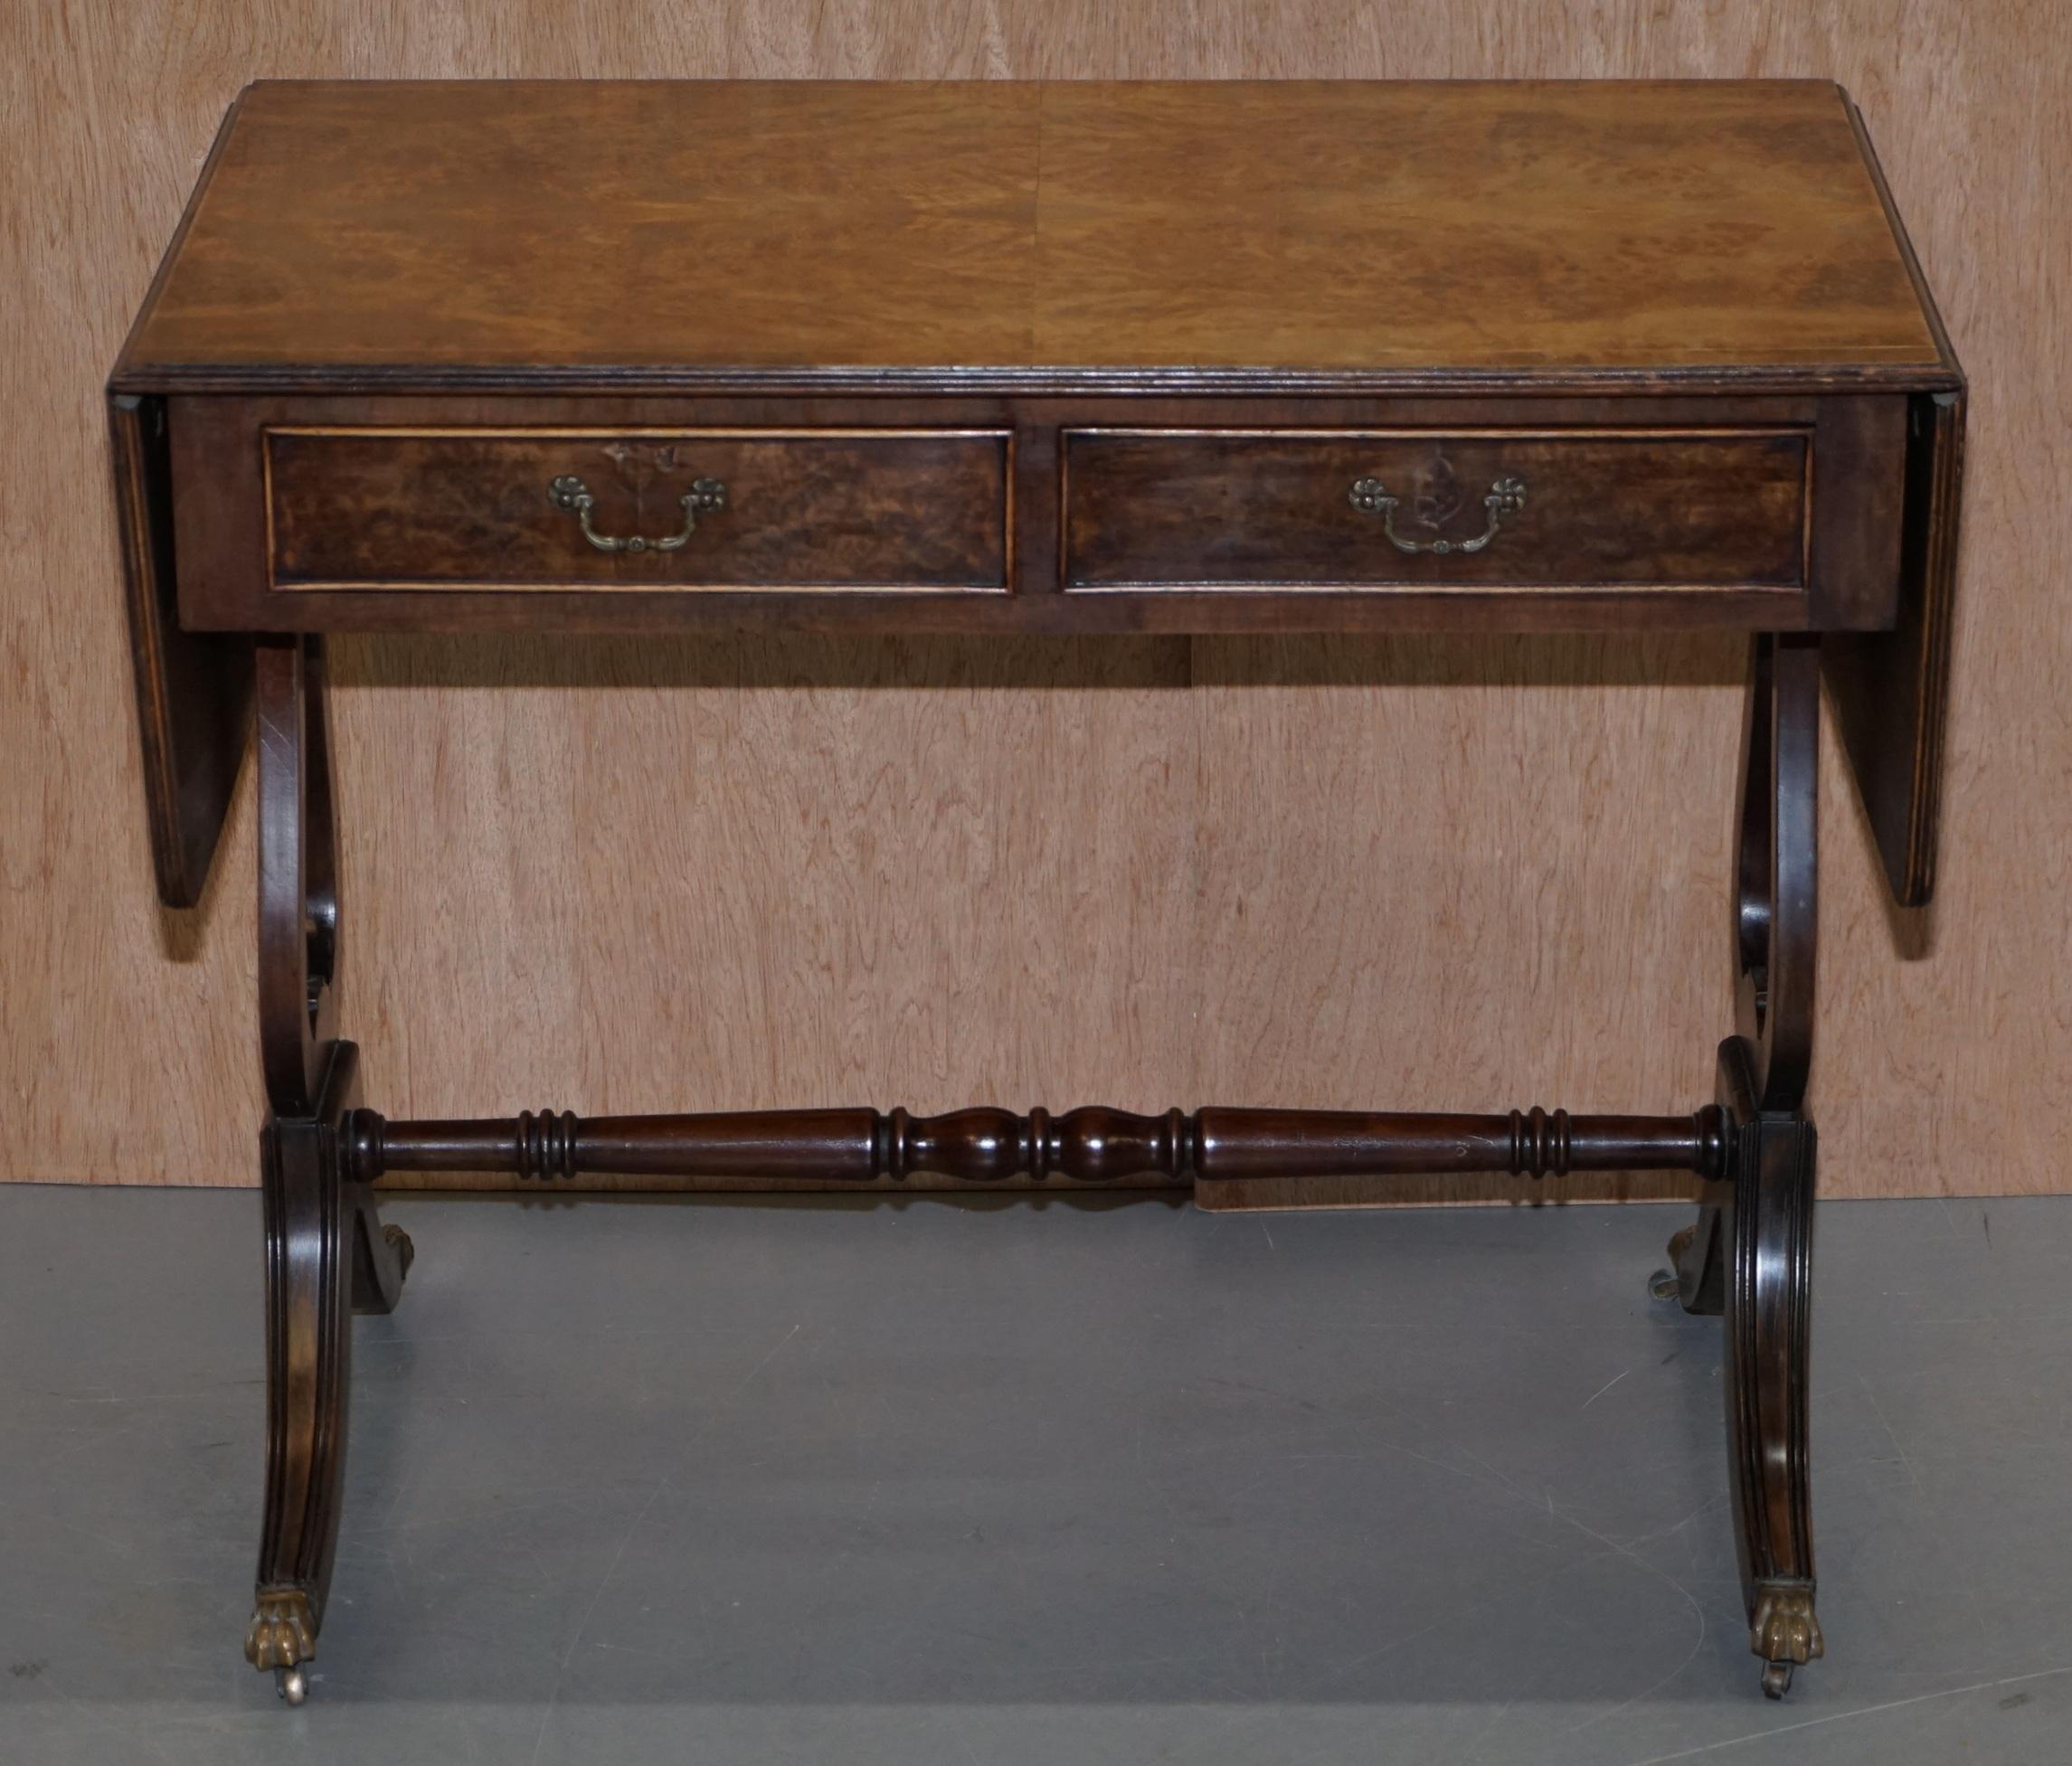 We are delighted to offer for sale this lovely large Bevan Funnell vintage burr walnut side table with extending top and twin drawers 

A very good looking and versatile piece, the table has twin drawers to the front and twin false drawers to the